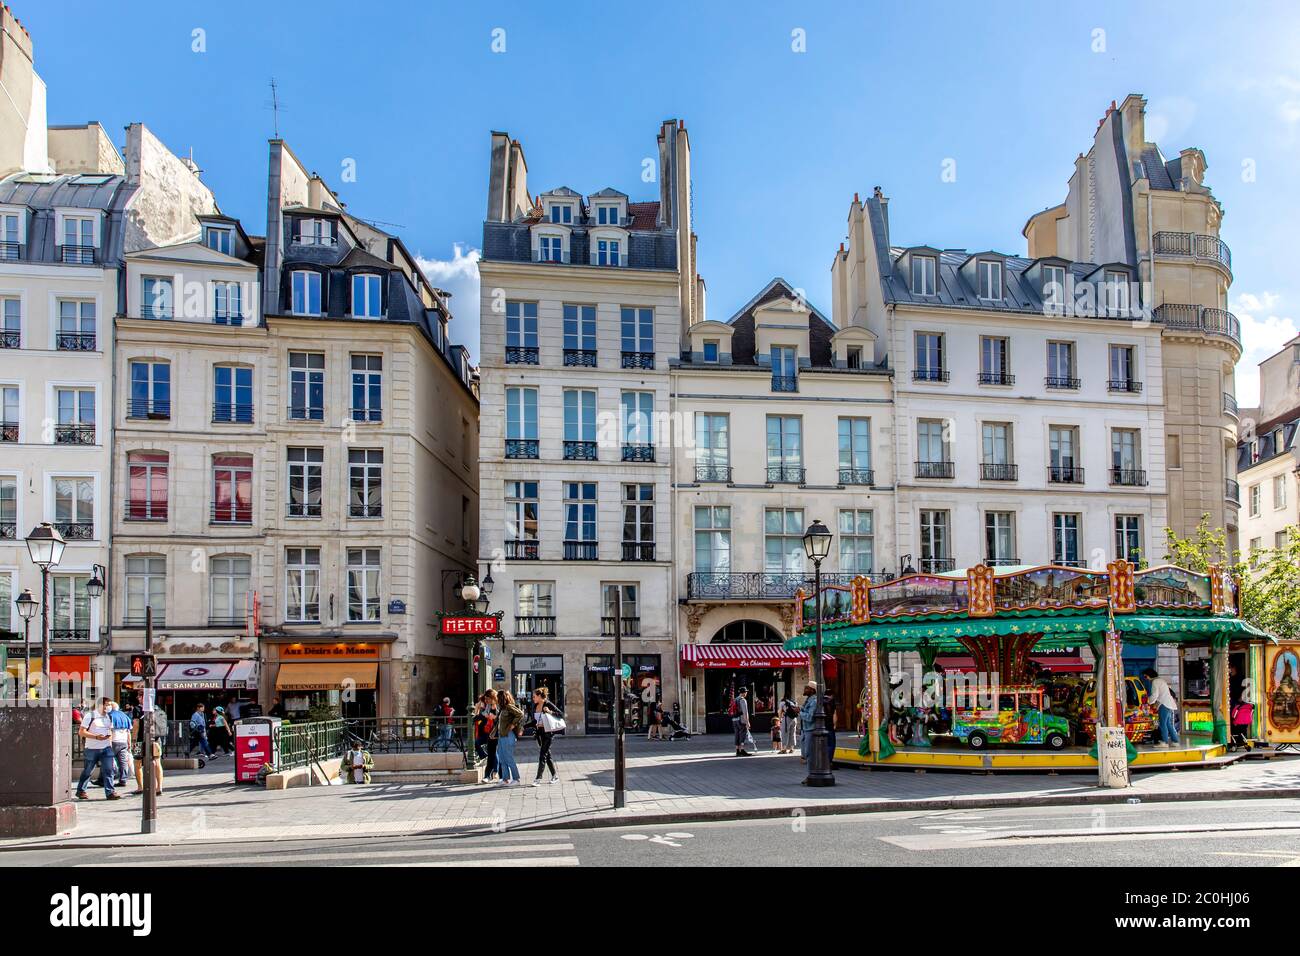 Paris, France - May 25, 2020: Rue Saint-Antoine in 4th arondissement. A major artery heading to the east of the city, this street was often used by th Stock Photo